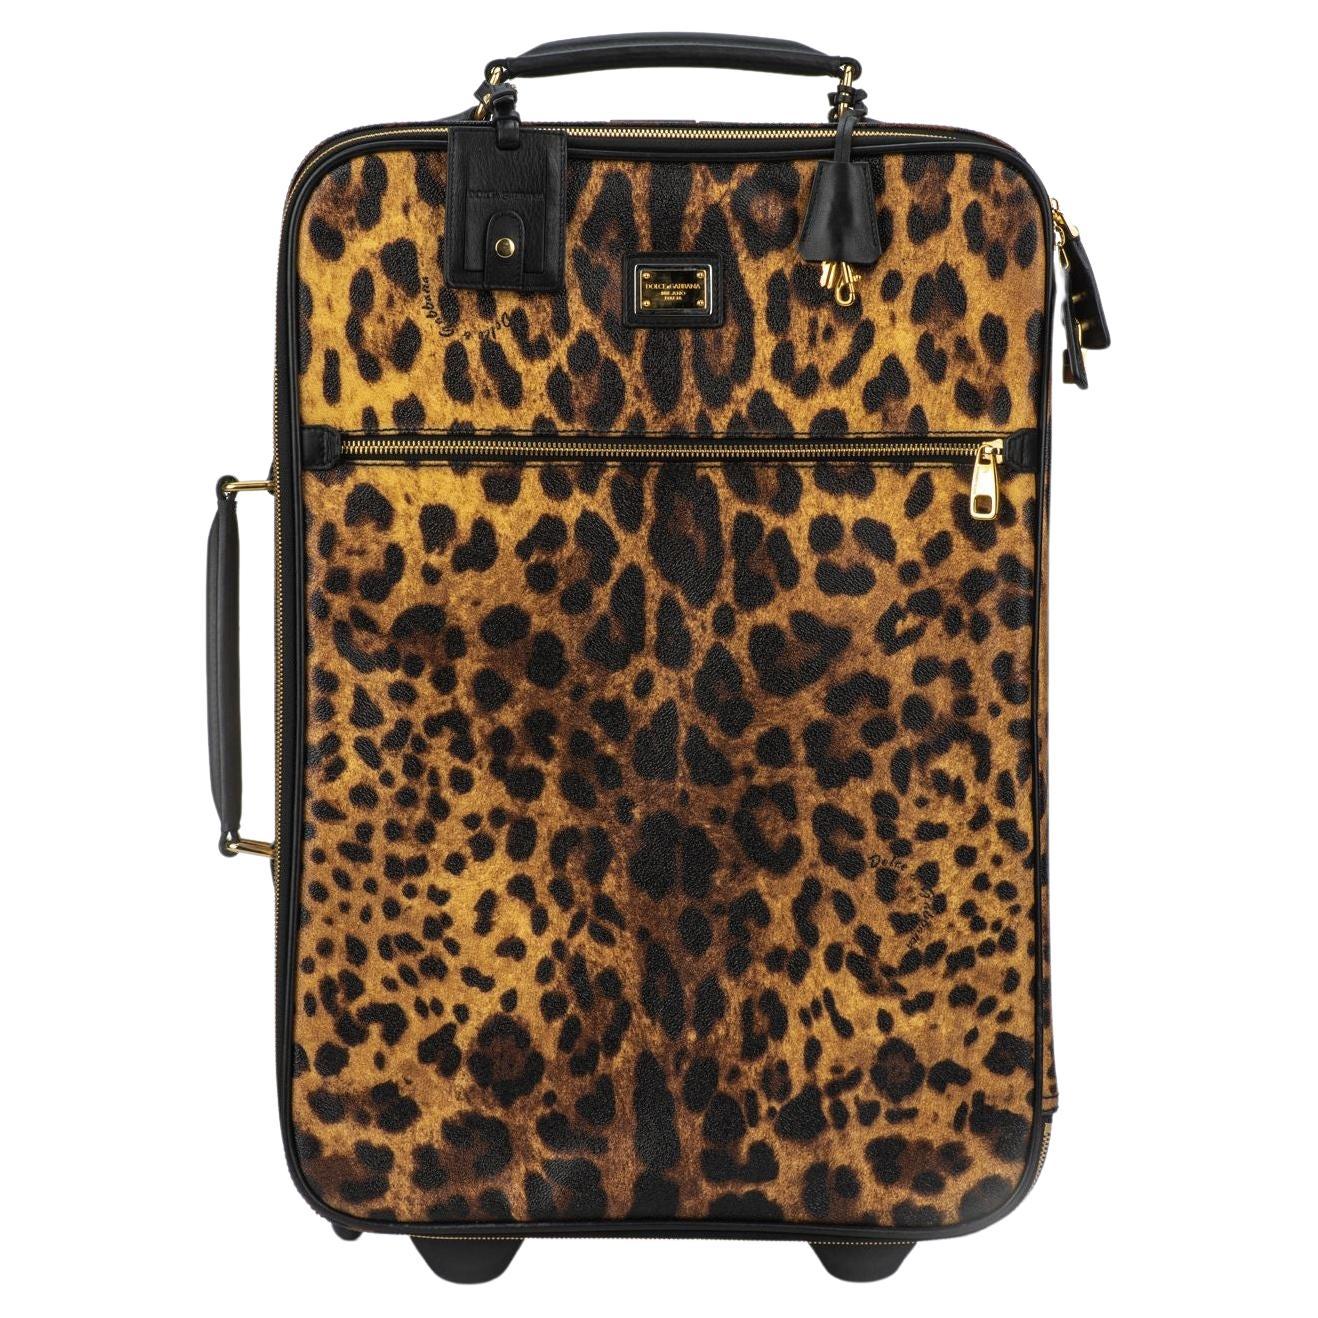 Dolce Cheetah Print Carry On Luggage For Sale